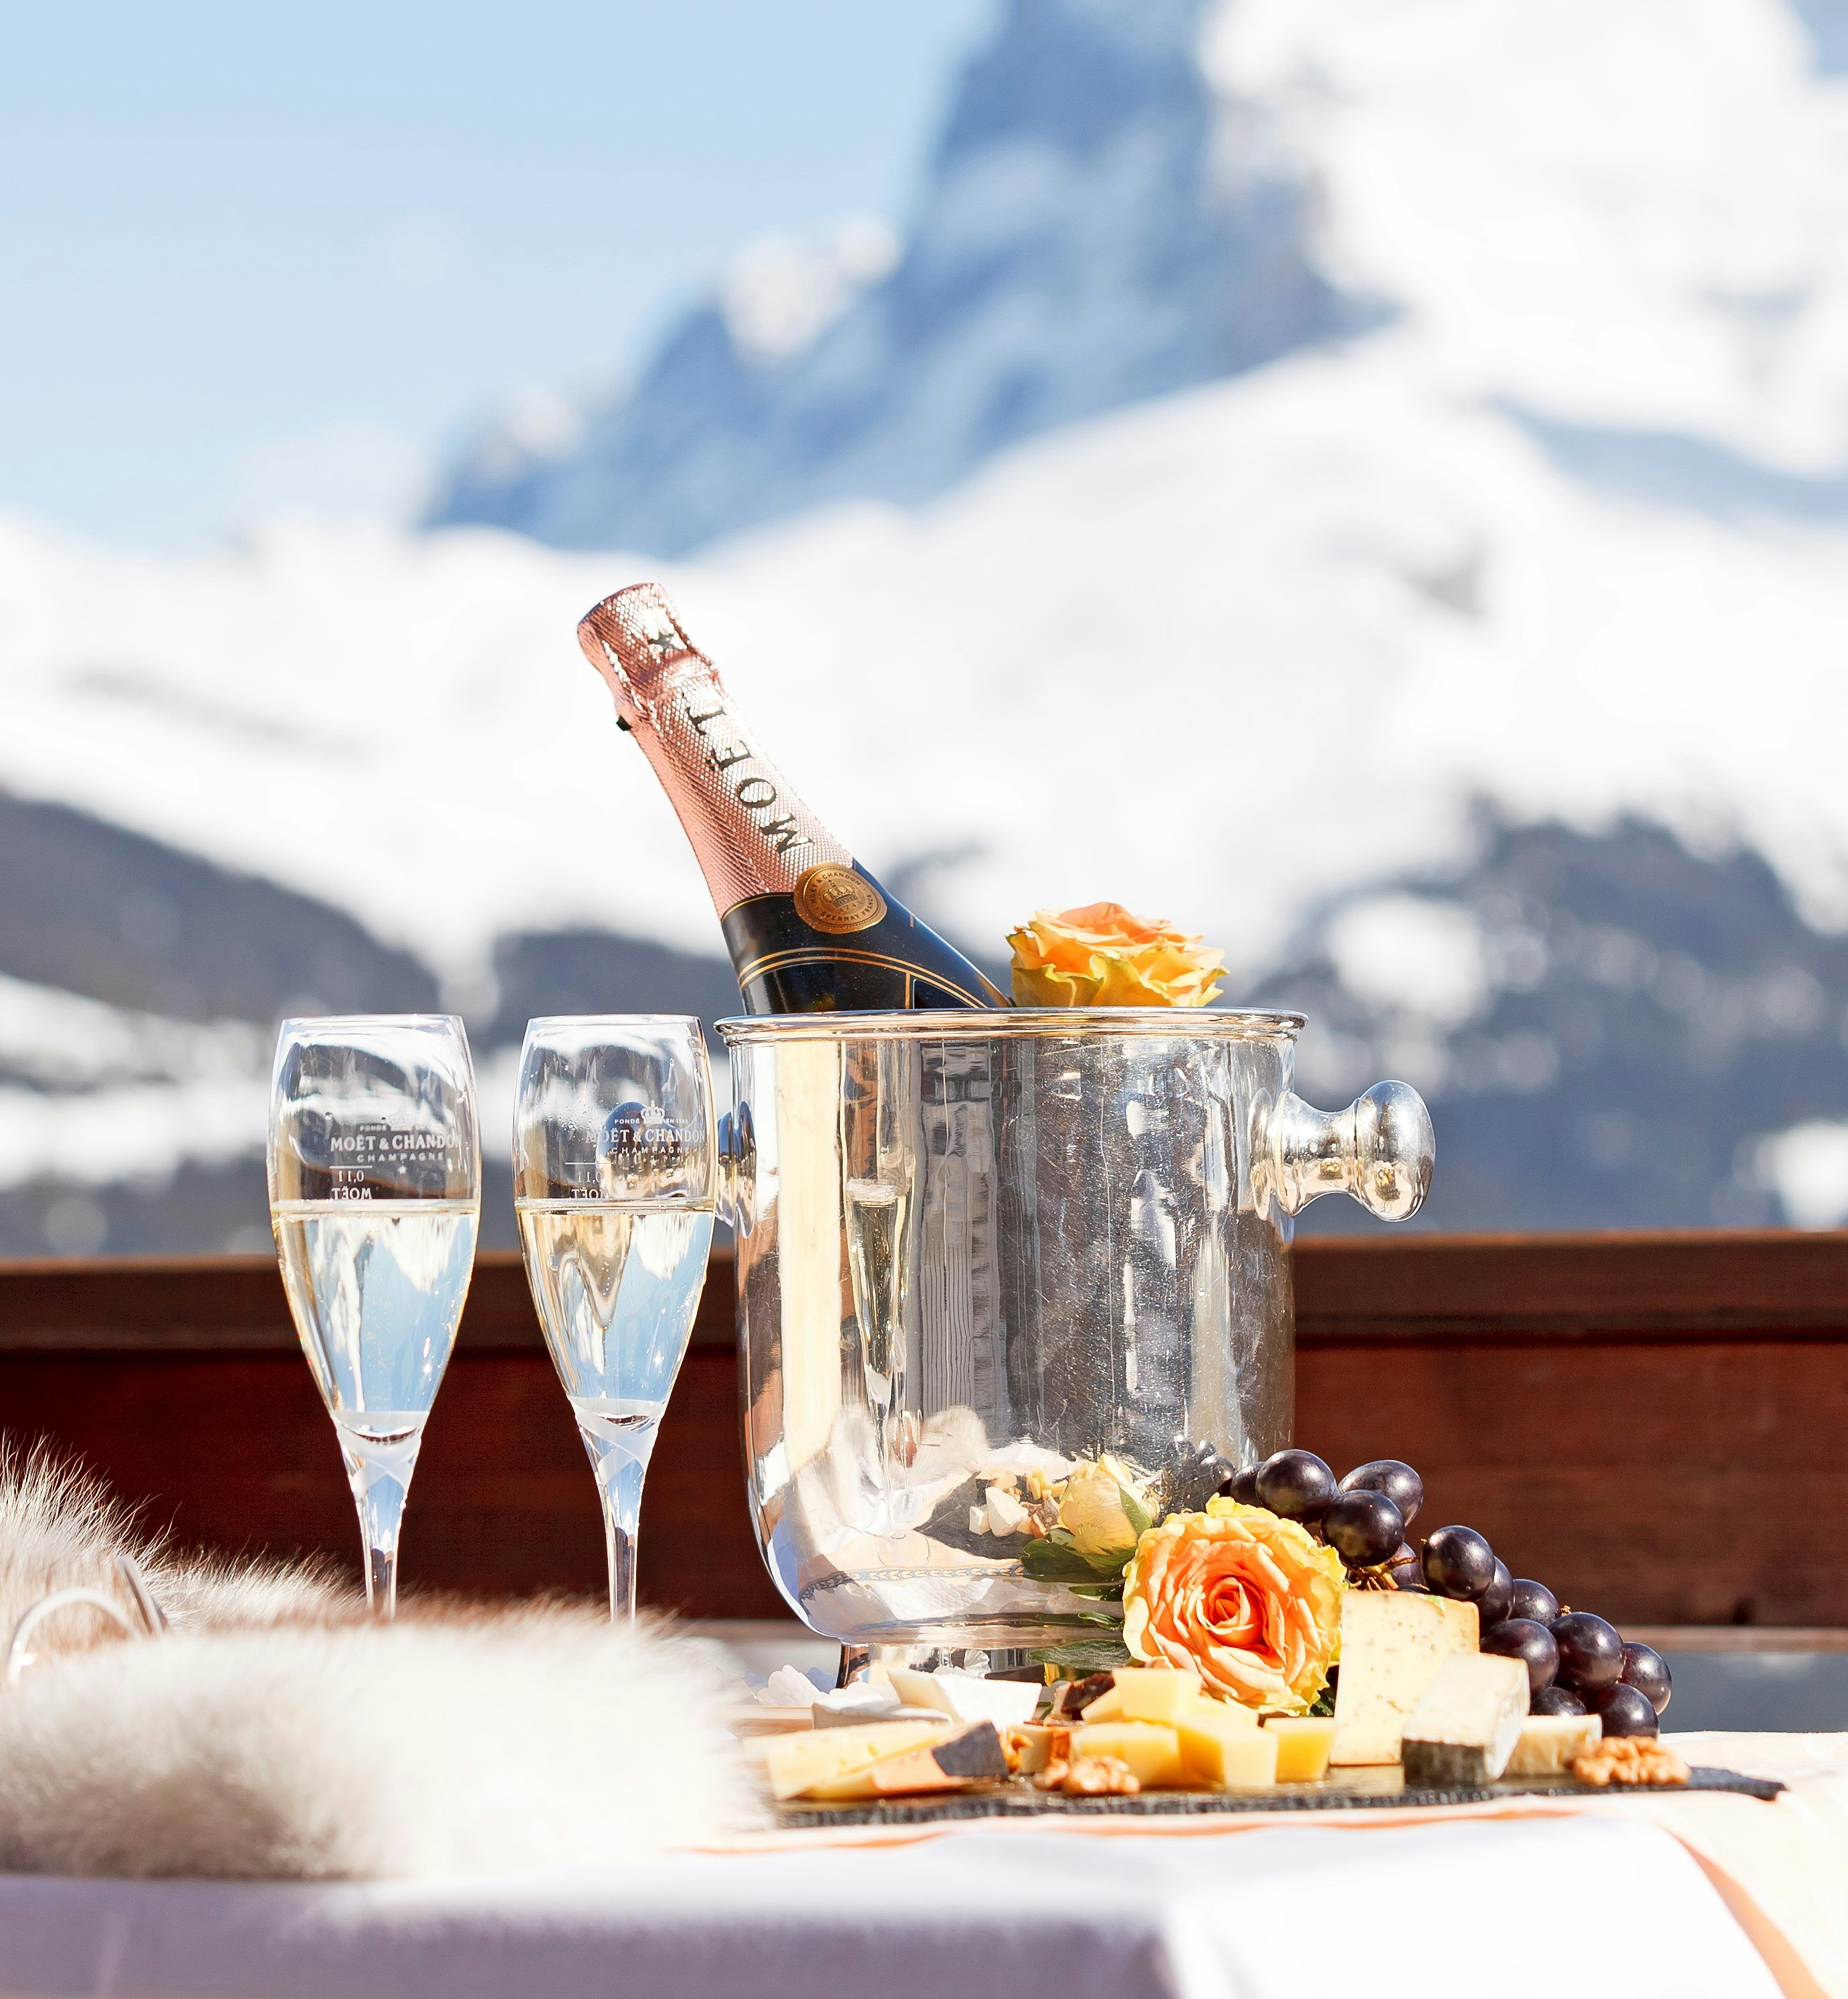 Culinary highlights at the Eiger